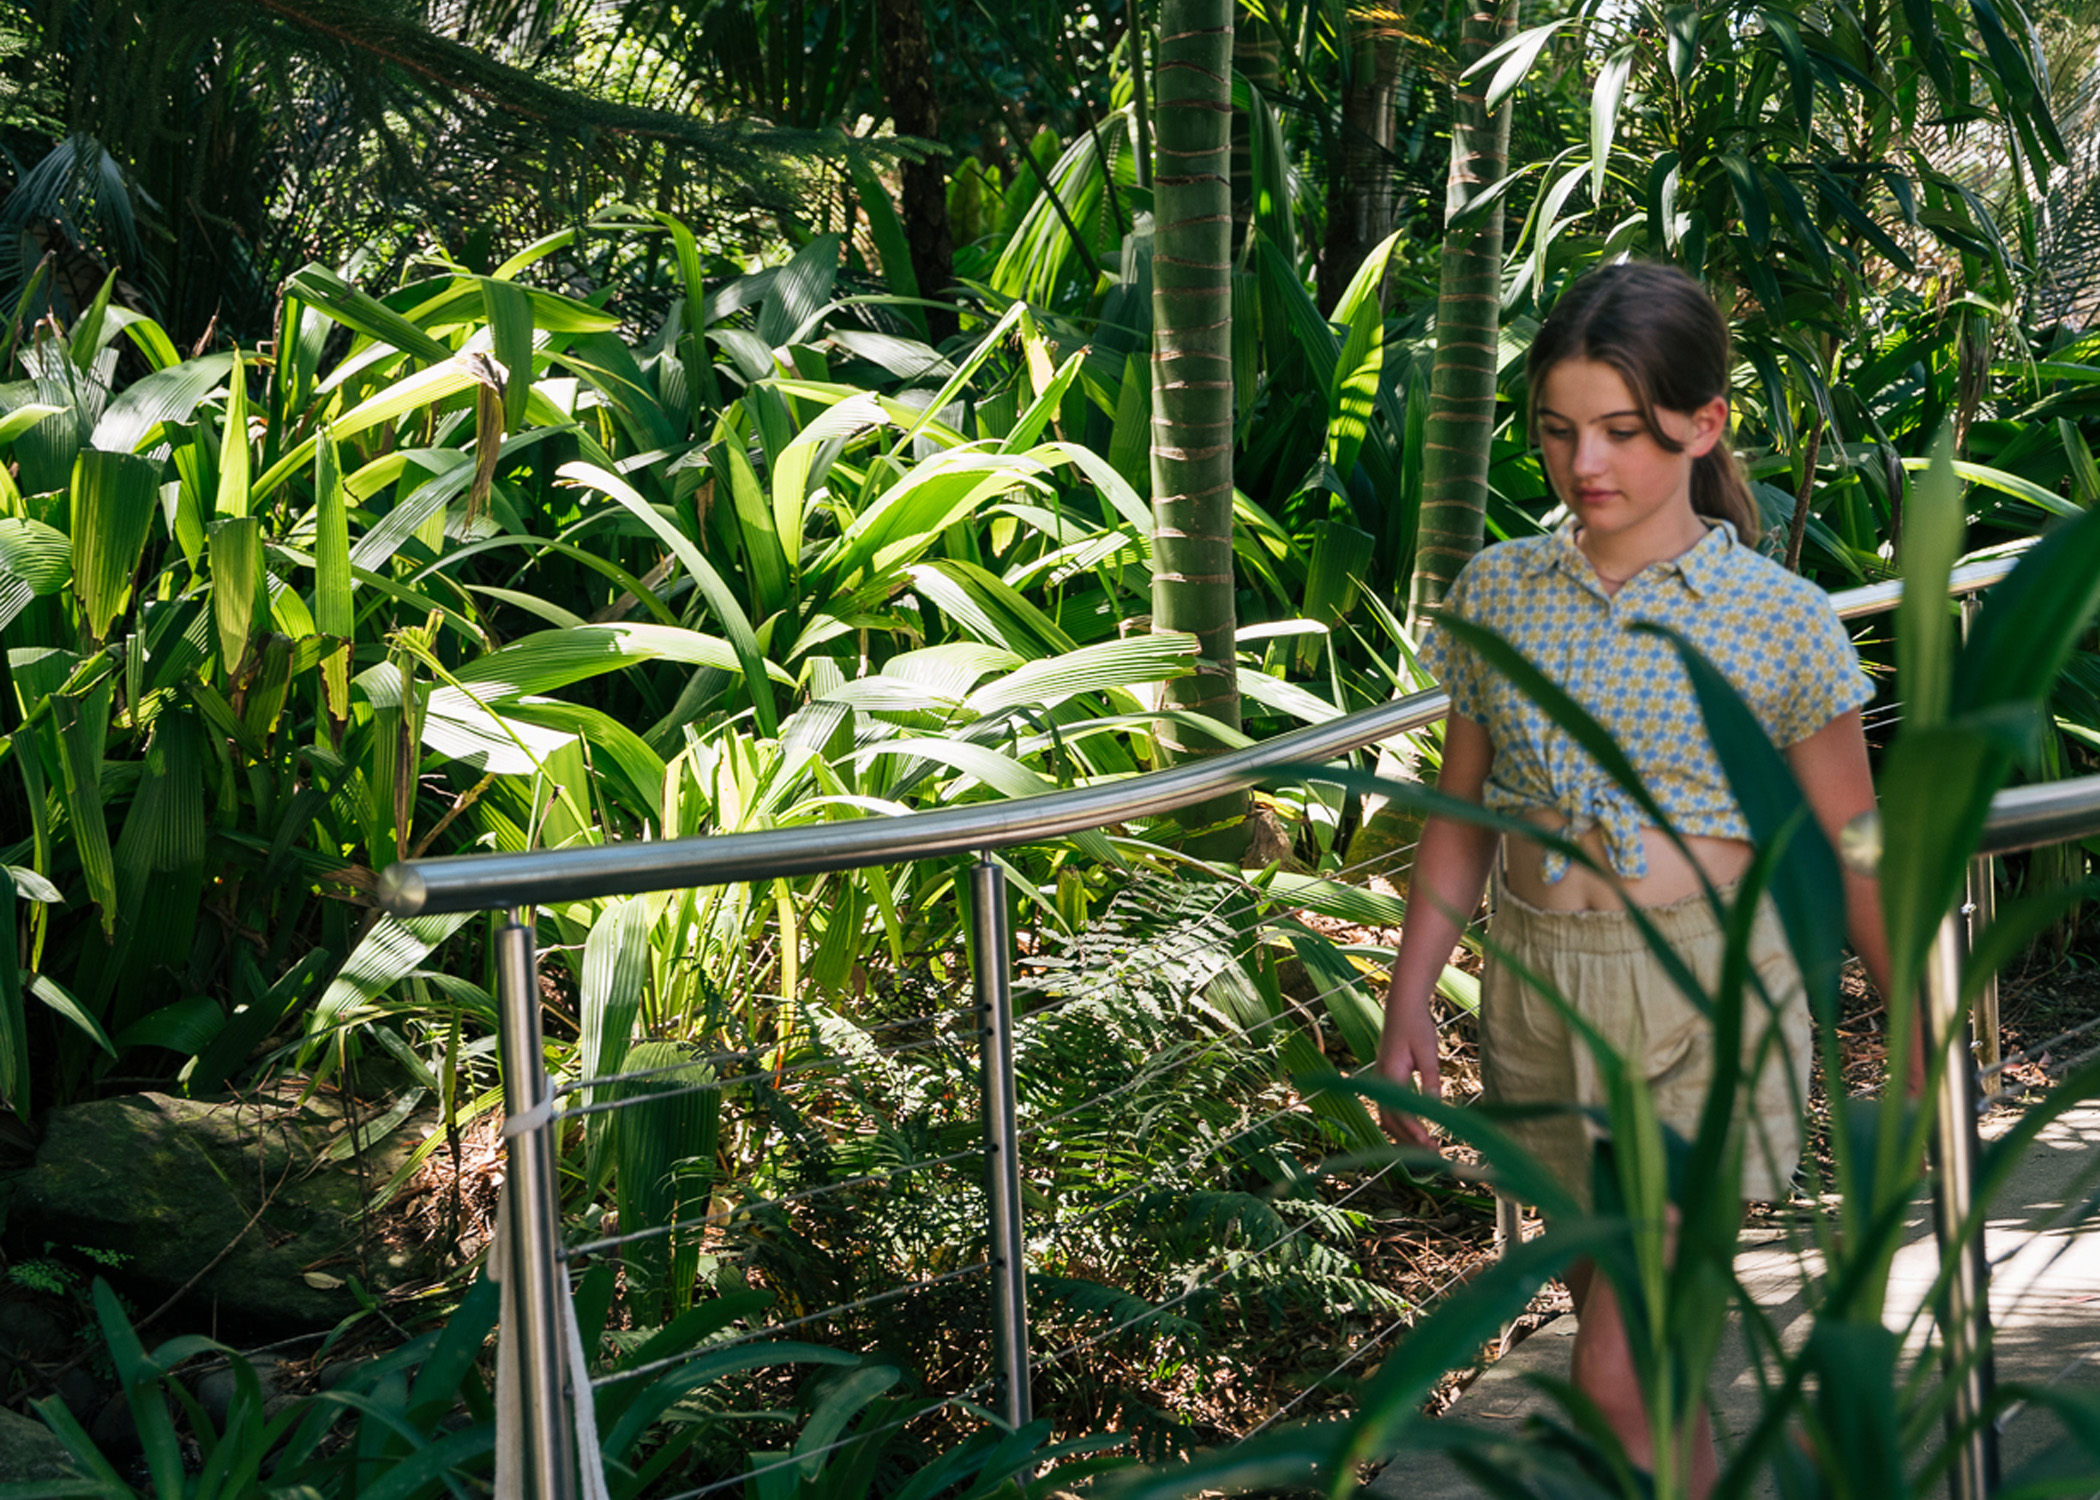 Primary school aged girl walking through tropical garden, the path is defined by a stainless steel railing.